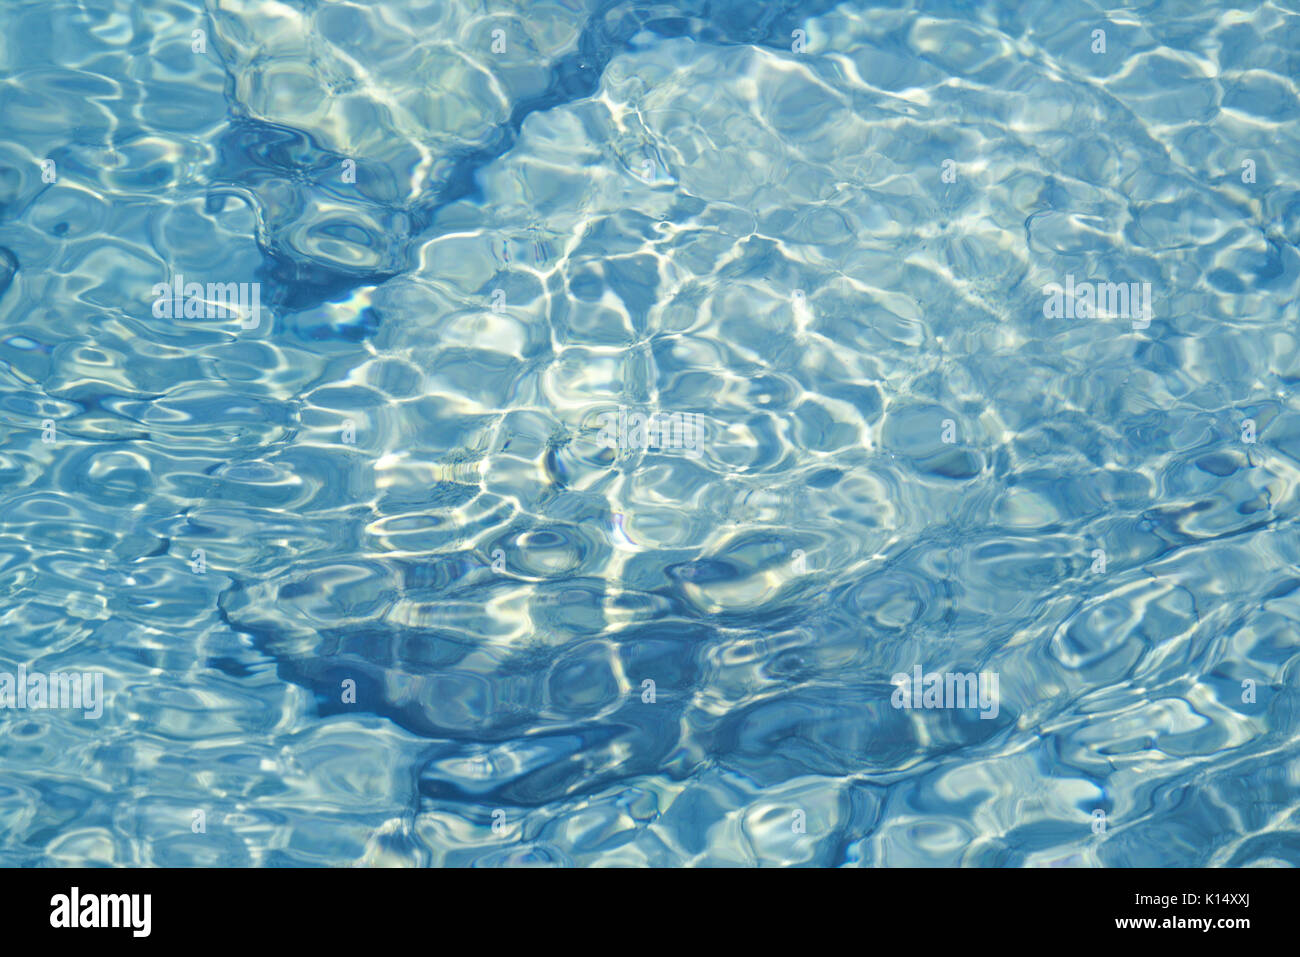 Shallow water over rocky bottom with reflections and small rippling waves Stock Photo